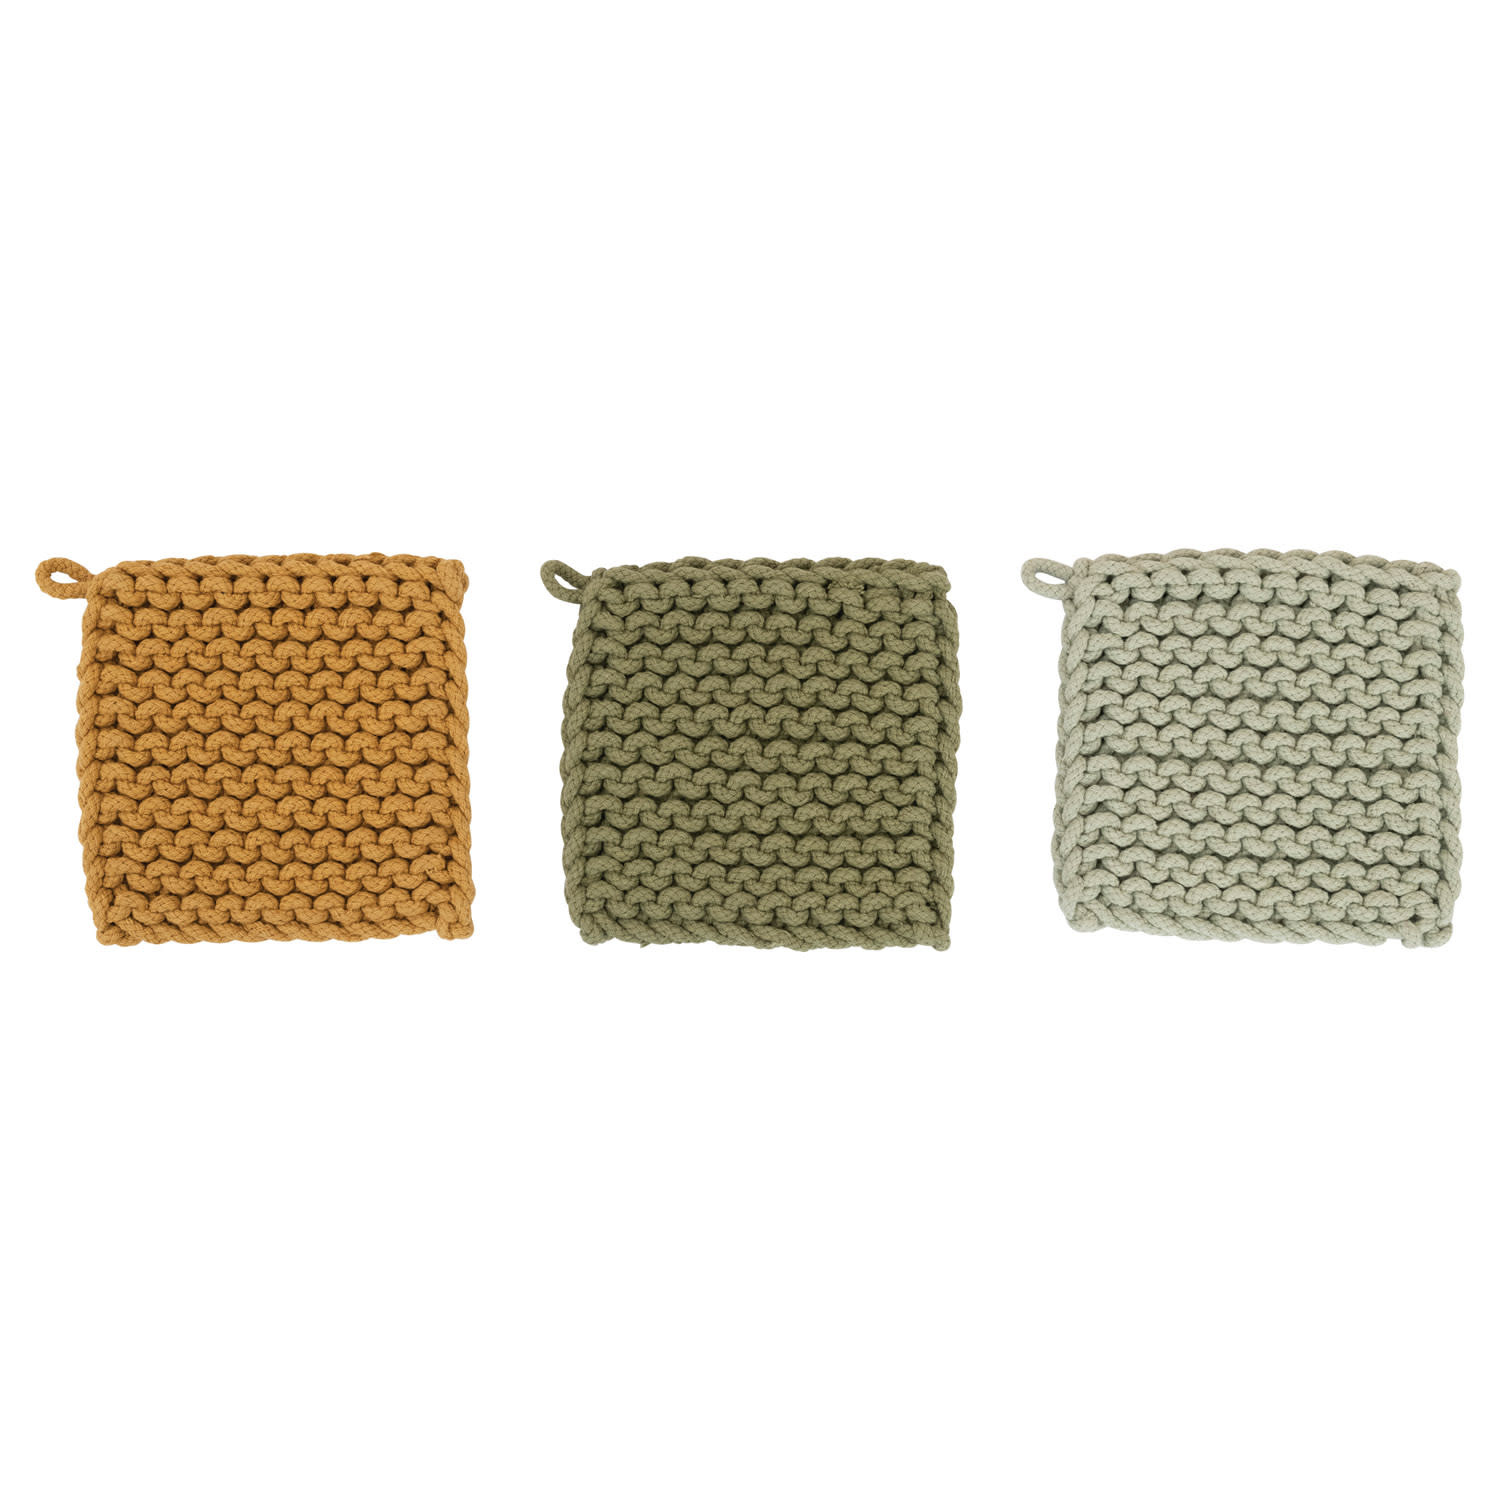 Cotton Crocheted Pot Holder, Assorted Colors